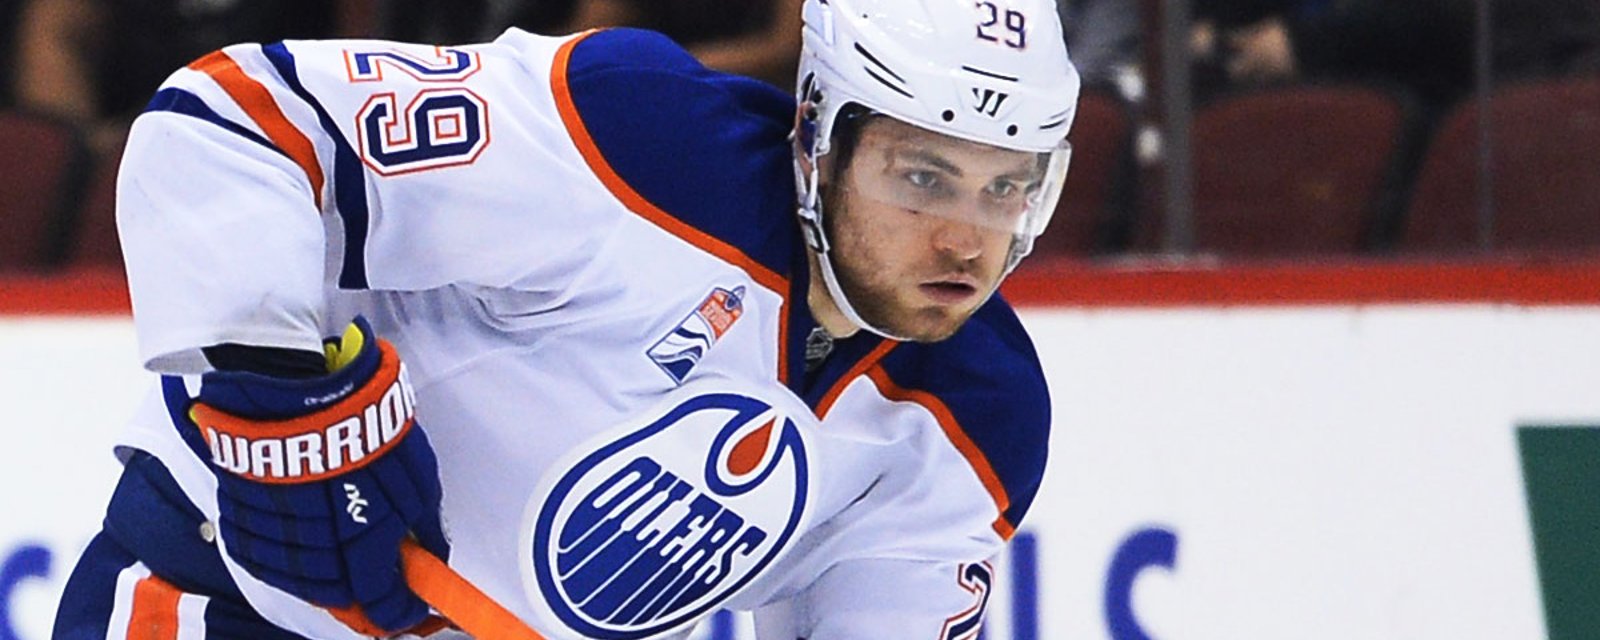 Leon Draisaitl reflects on playing with Connor McDavid!